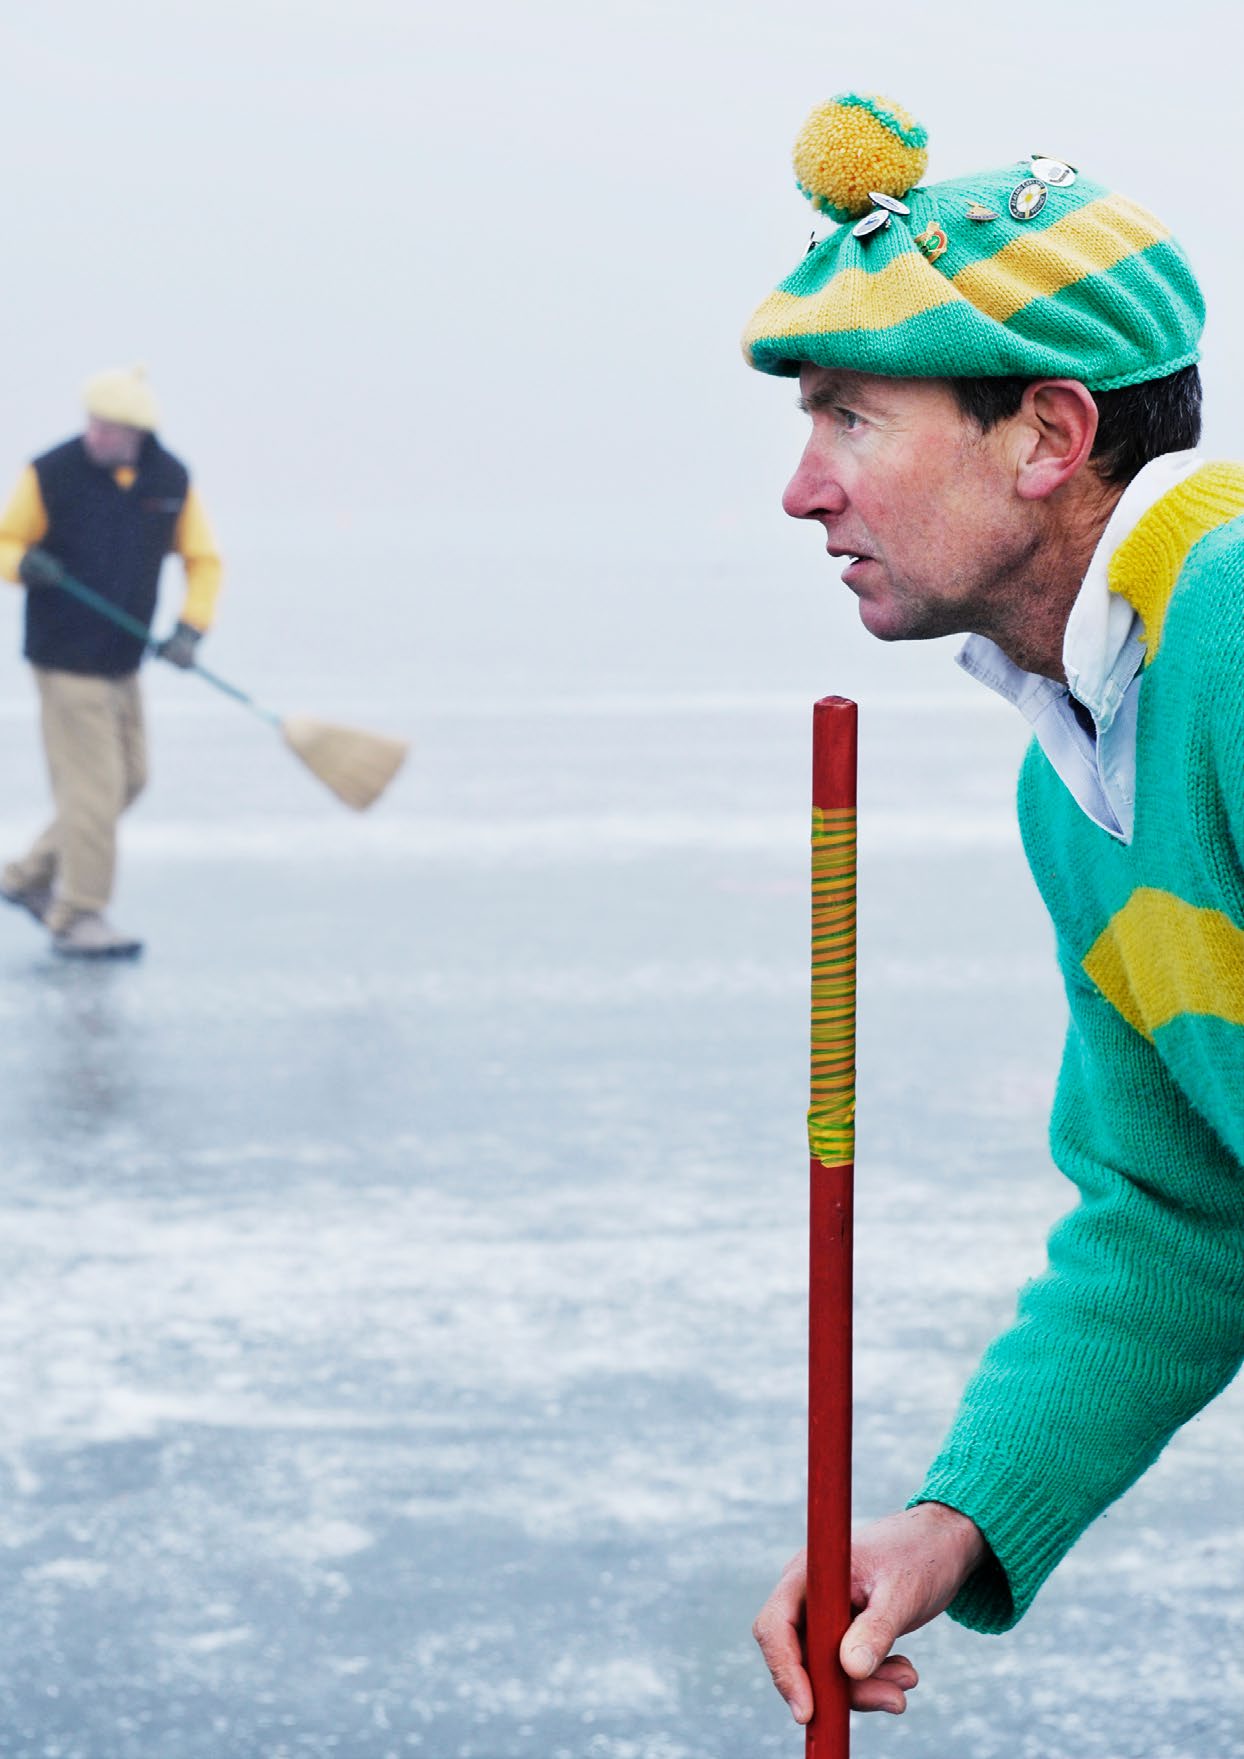 A member of the Poolburn Curling Club directs a teammate’s throw during the 2010 Bonspiel on the Idaburn Dam.